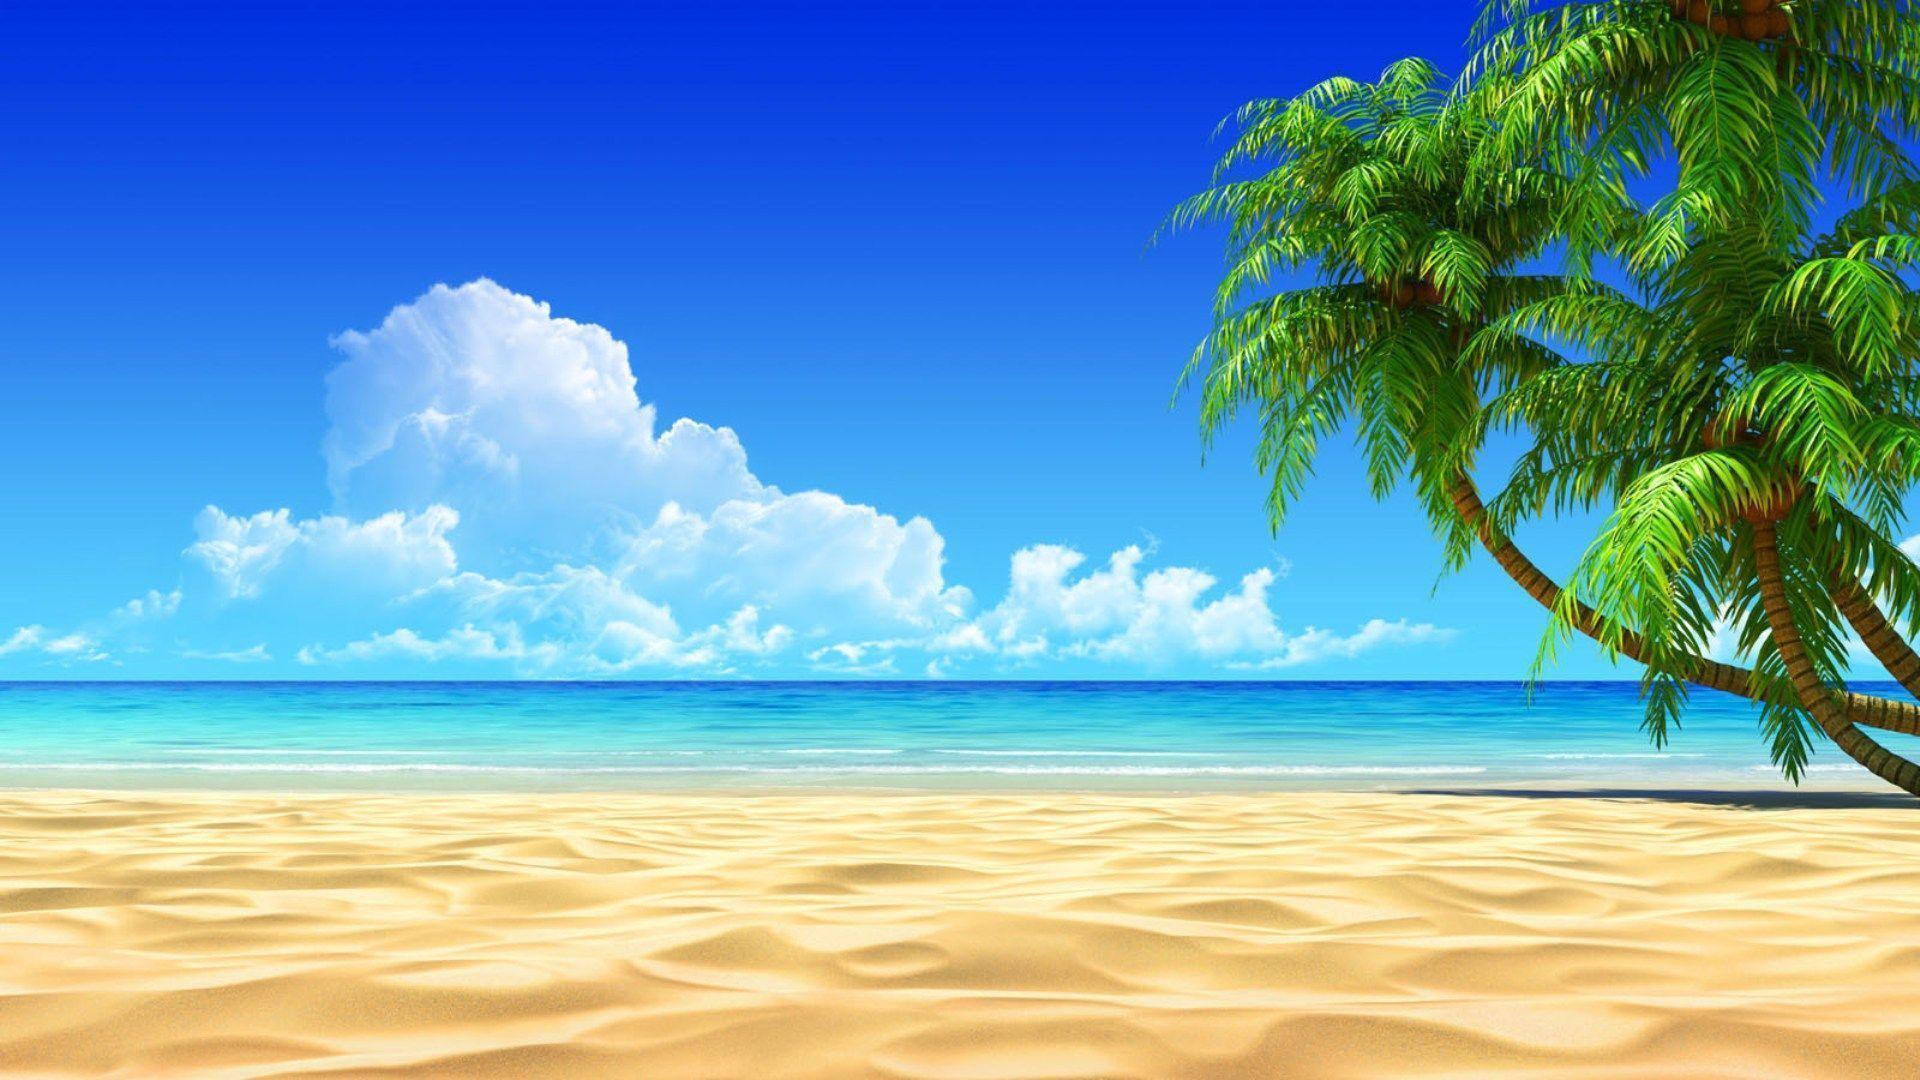 beach images for backgrounds